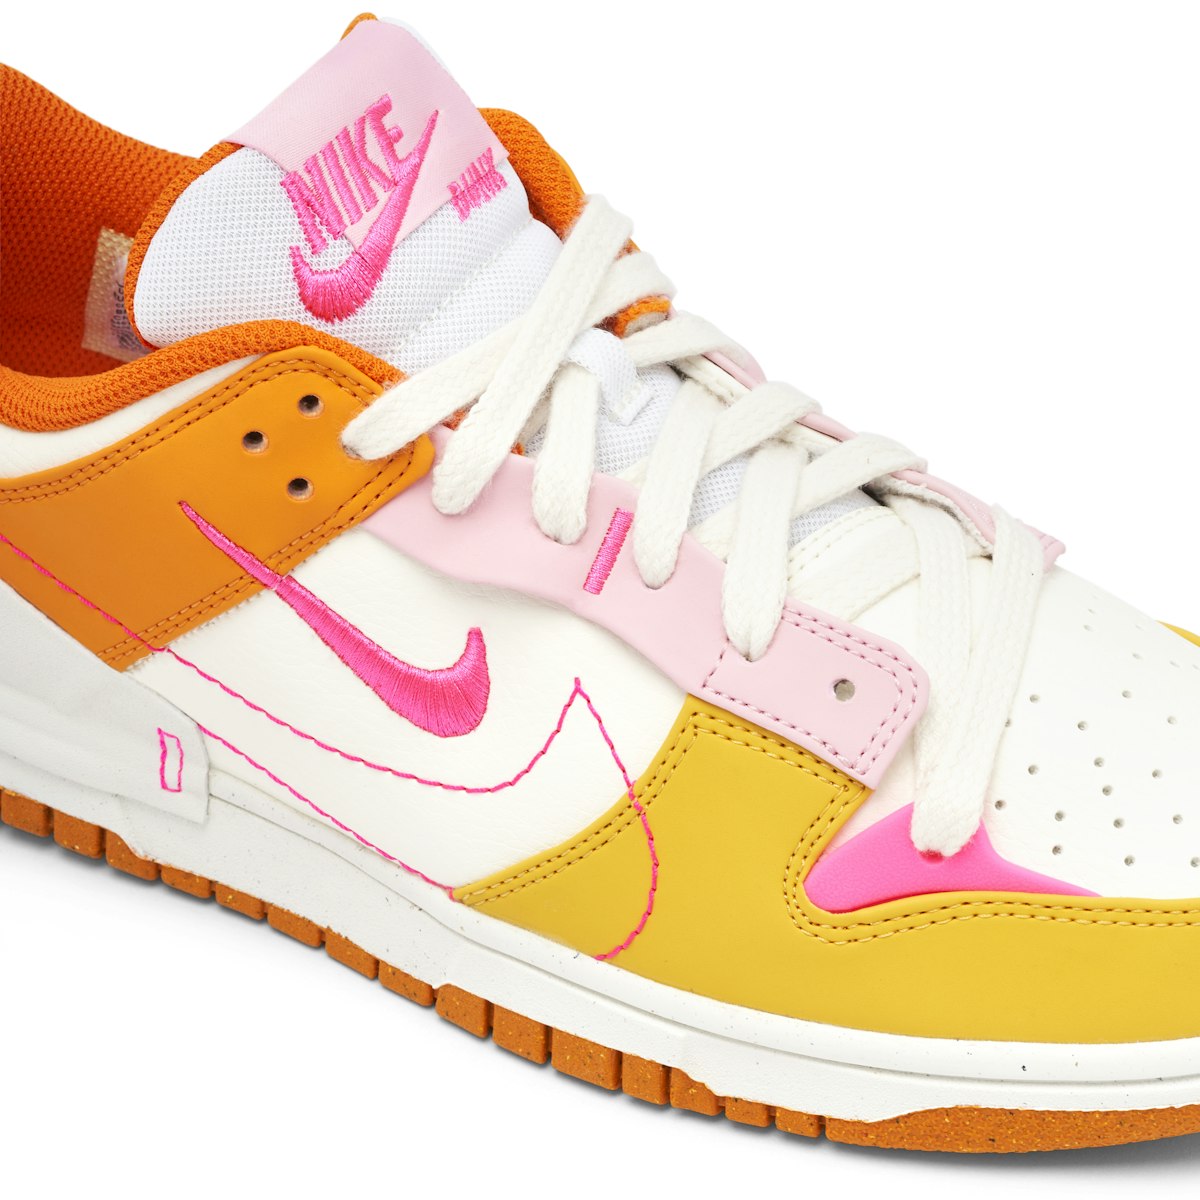 Sundial Accents This Nike Dunk Low